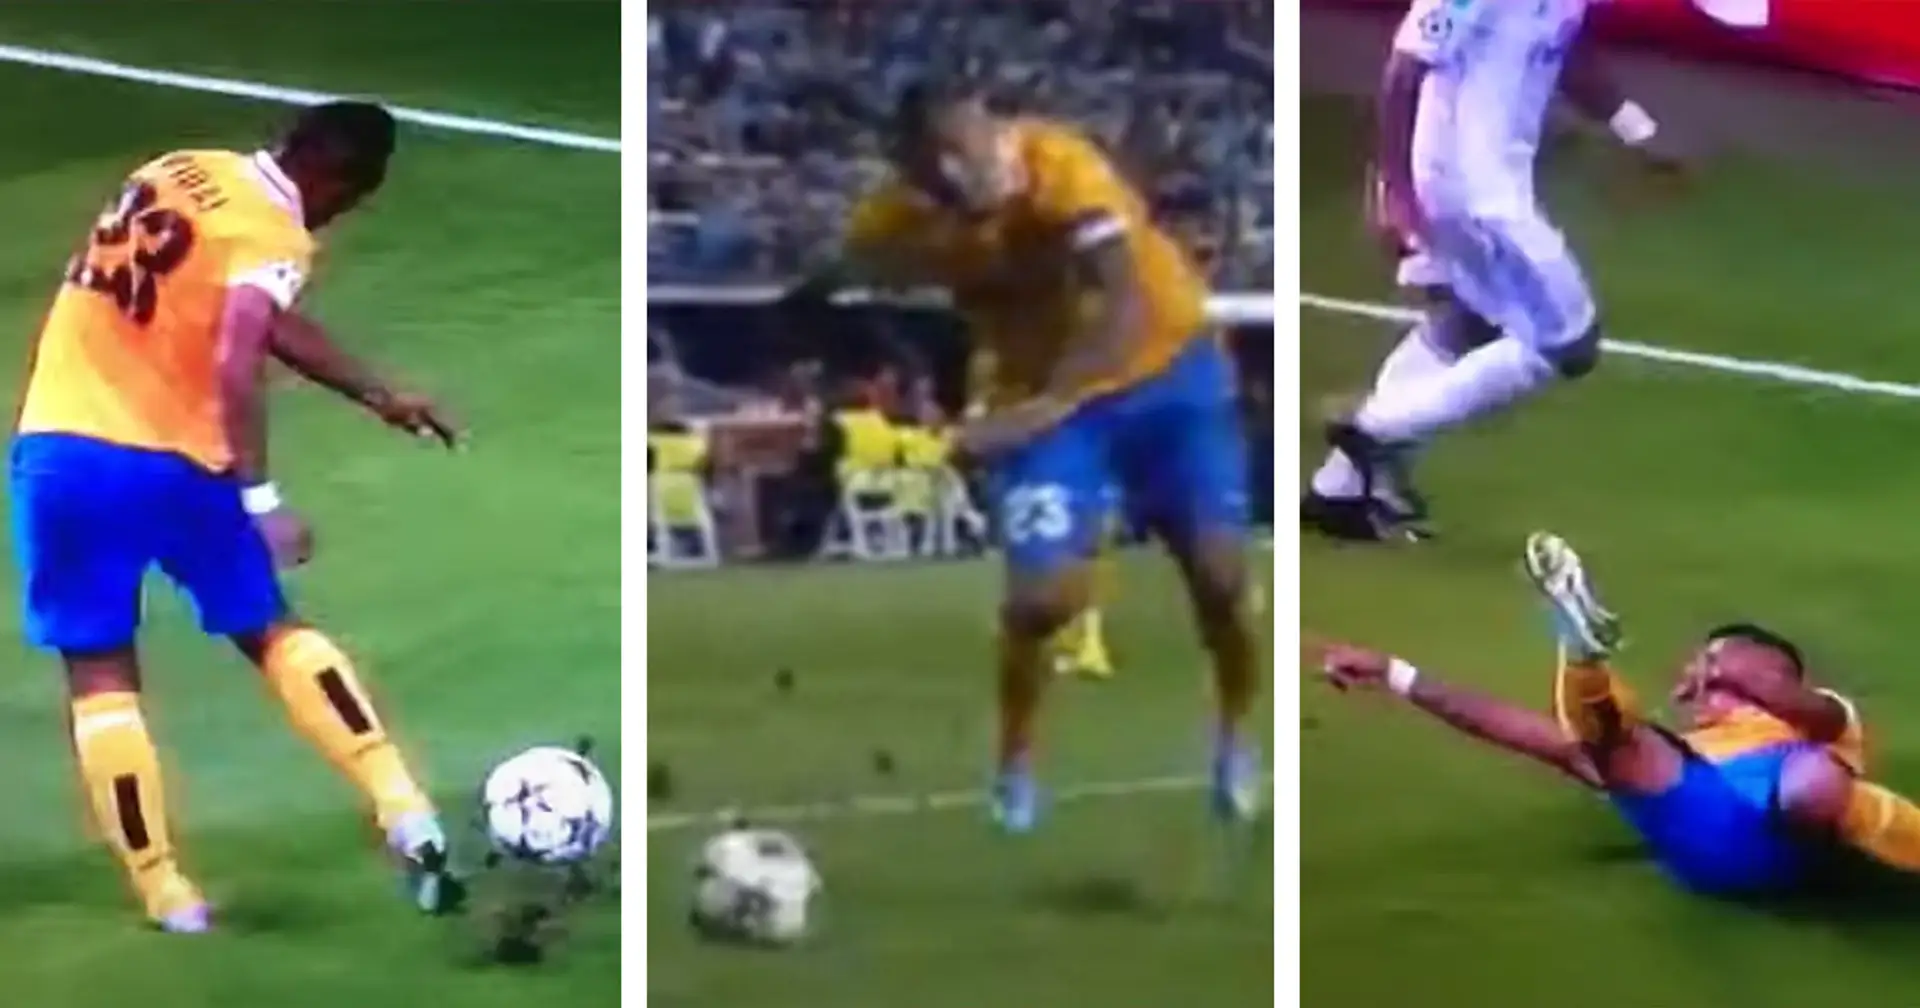 Tackled by the grass: Throwback to one of the worst dives ever by Arturo Vidal vs Real Madrid